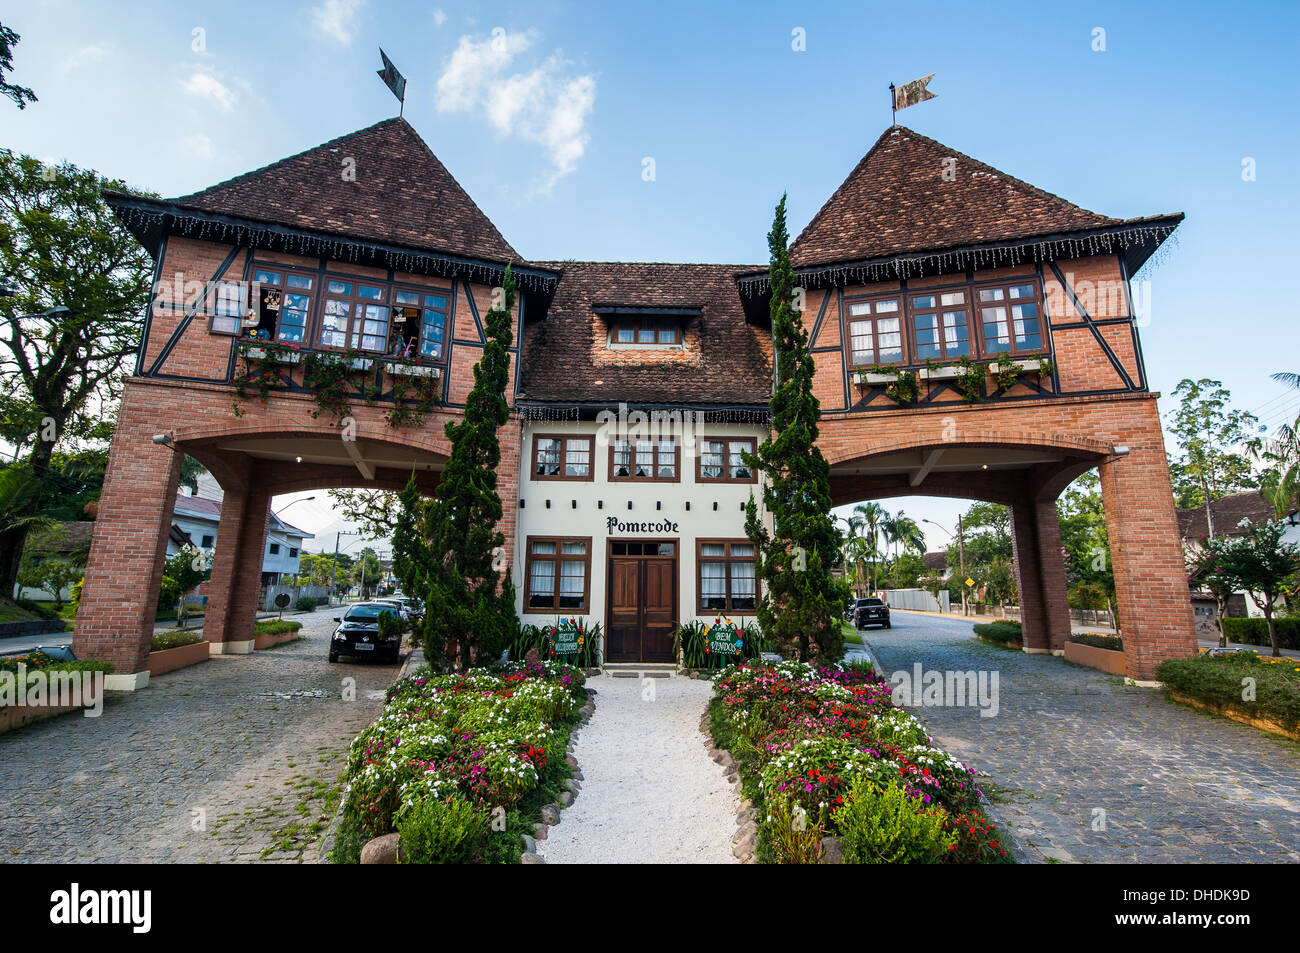 Town gate of the German speaking town of Pomerode, Brazil Stock Photo